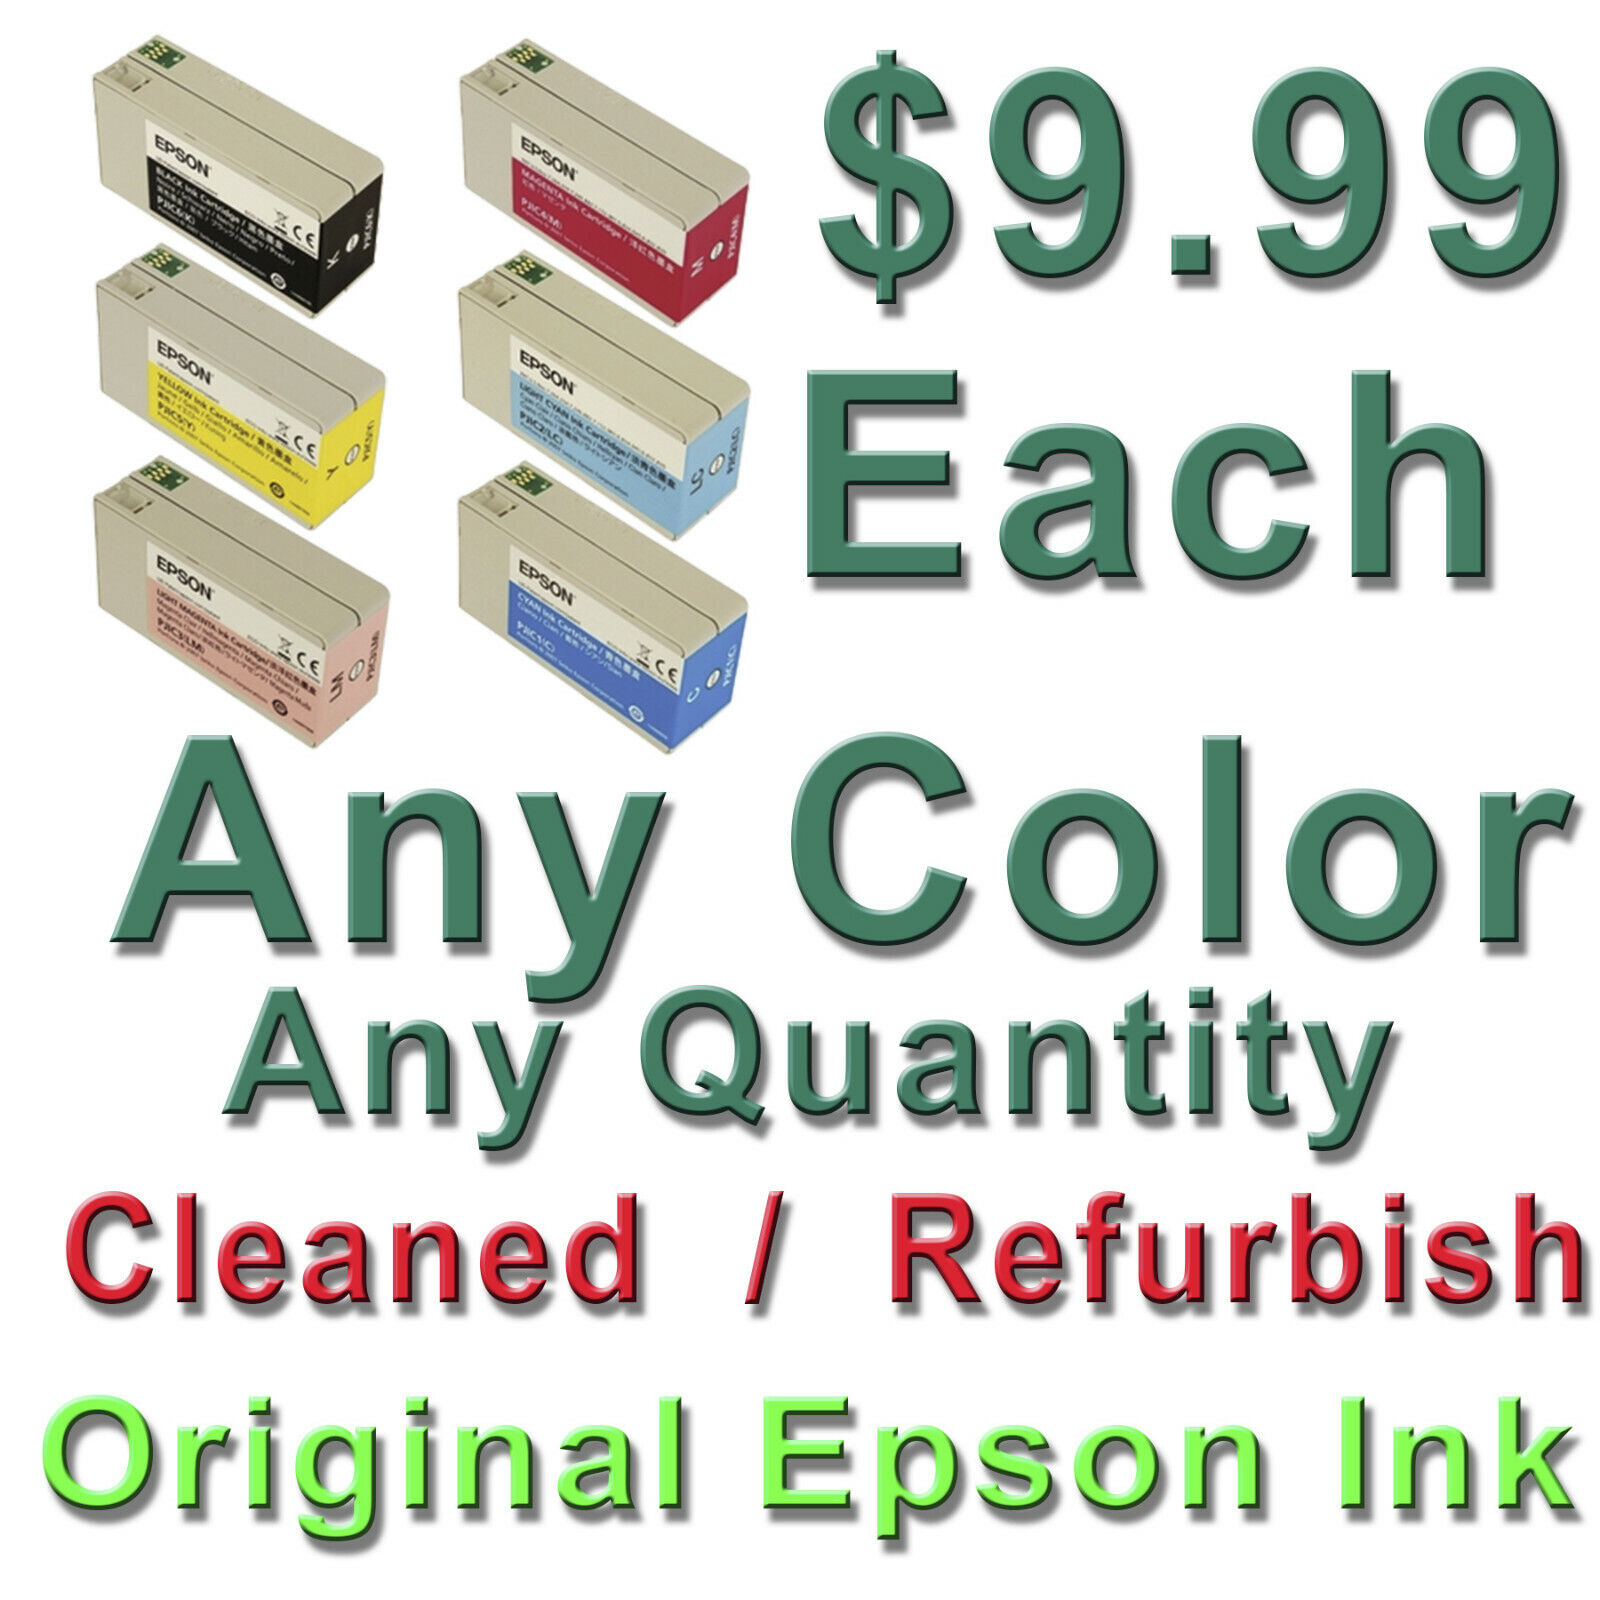 REFILL YOUR Used Epson Discproducer PP-100/PP-50 Ink Cartridges  $9.99 Each